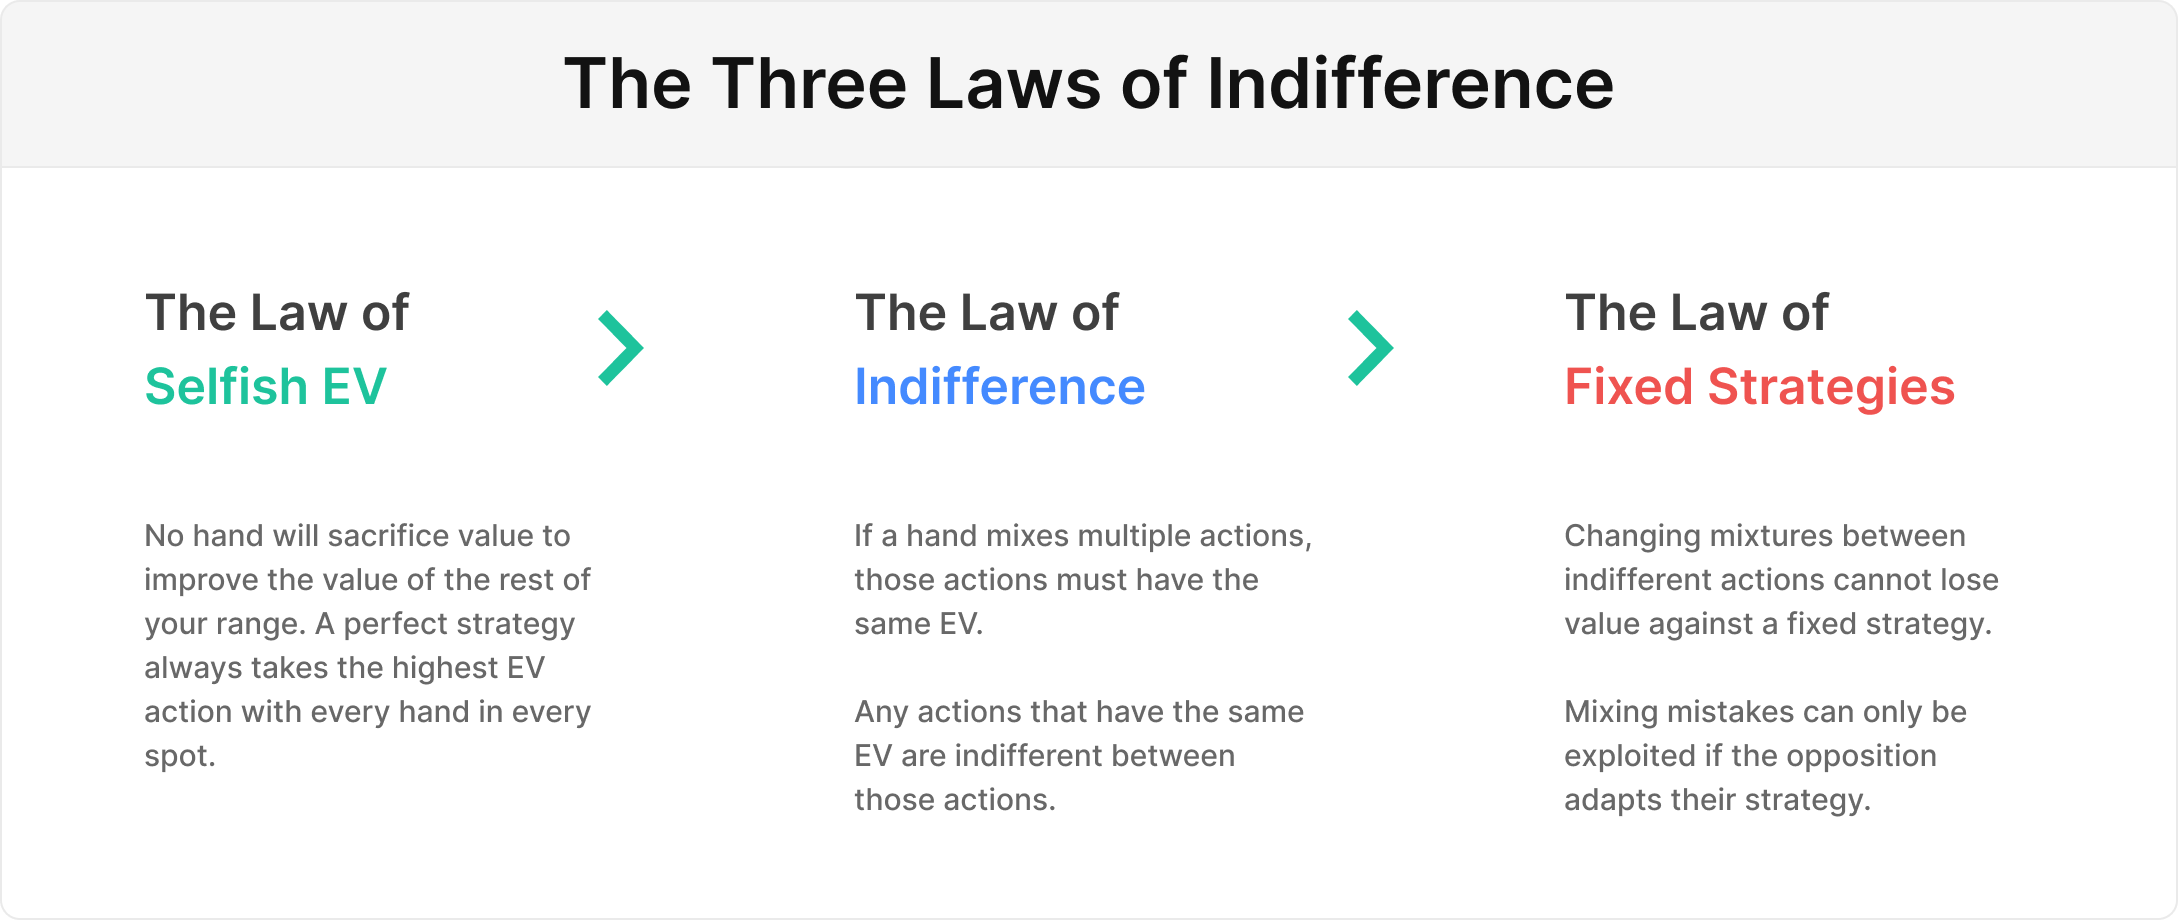 The Three Laws of Indifference